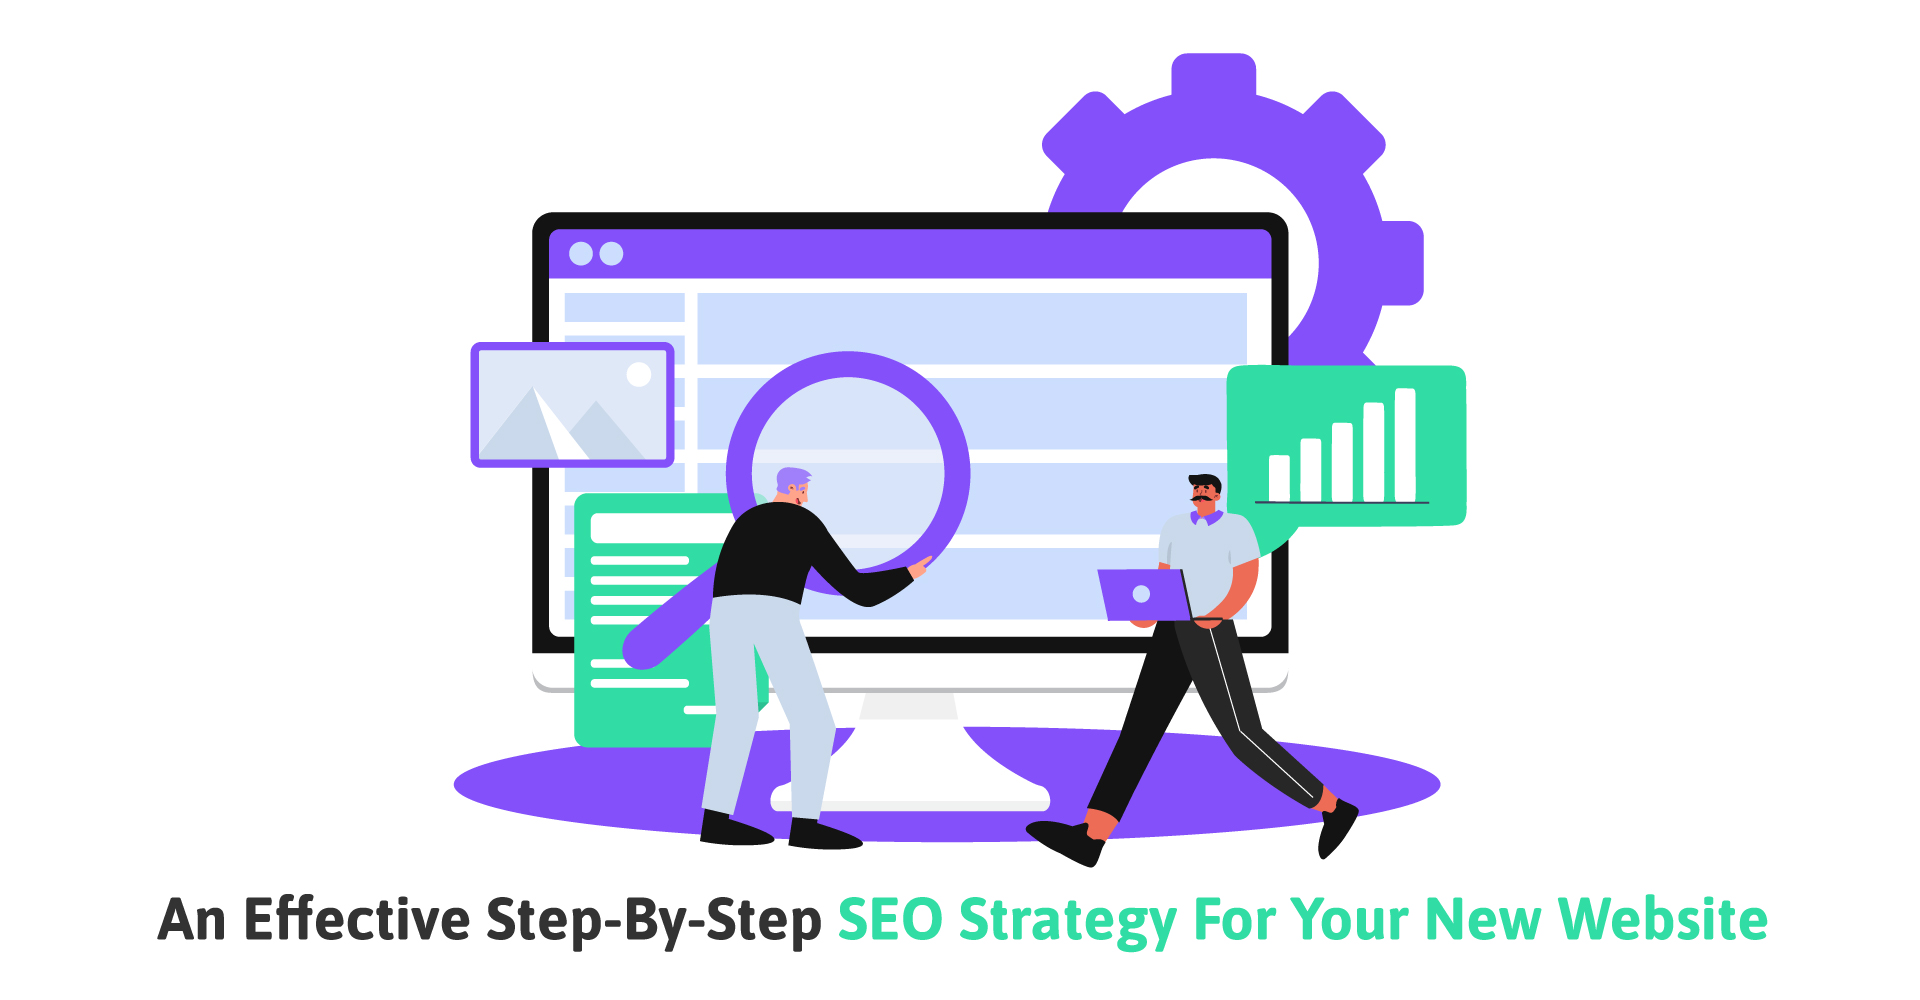 An Effective Step-By-Step SEO Strategy For Your New Website